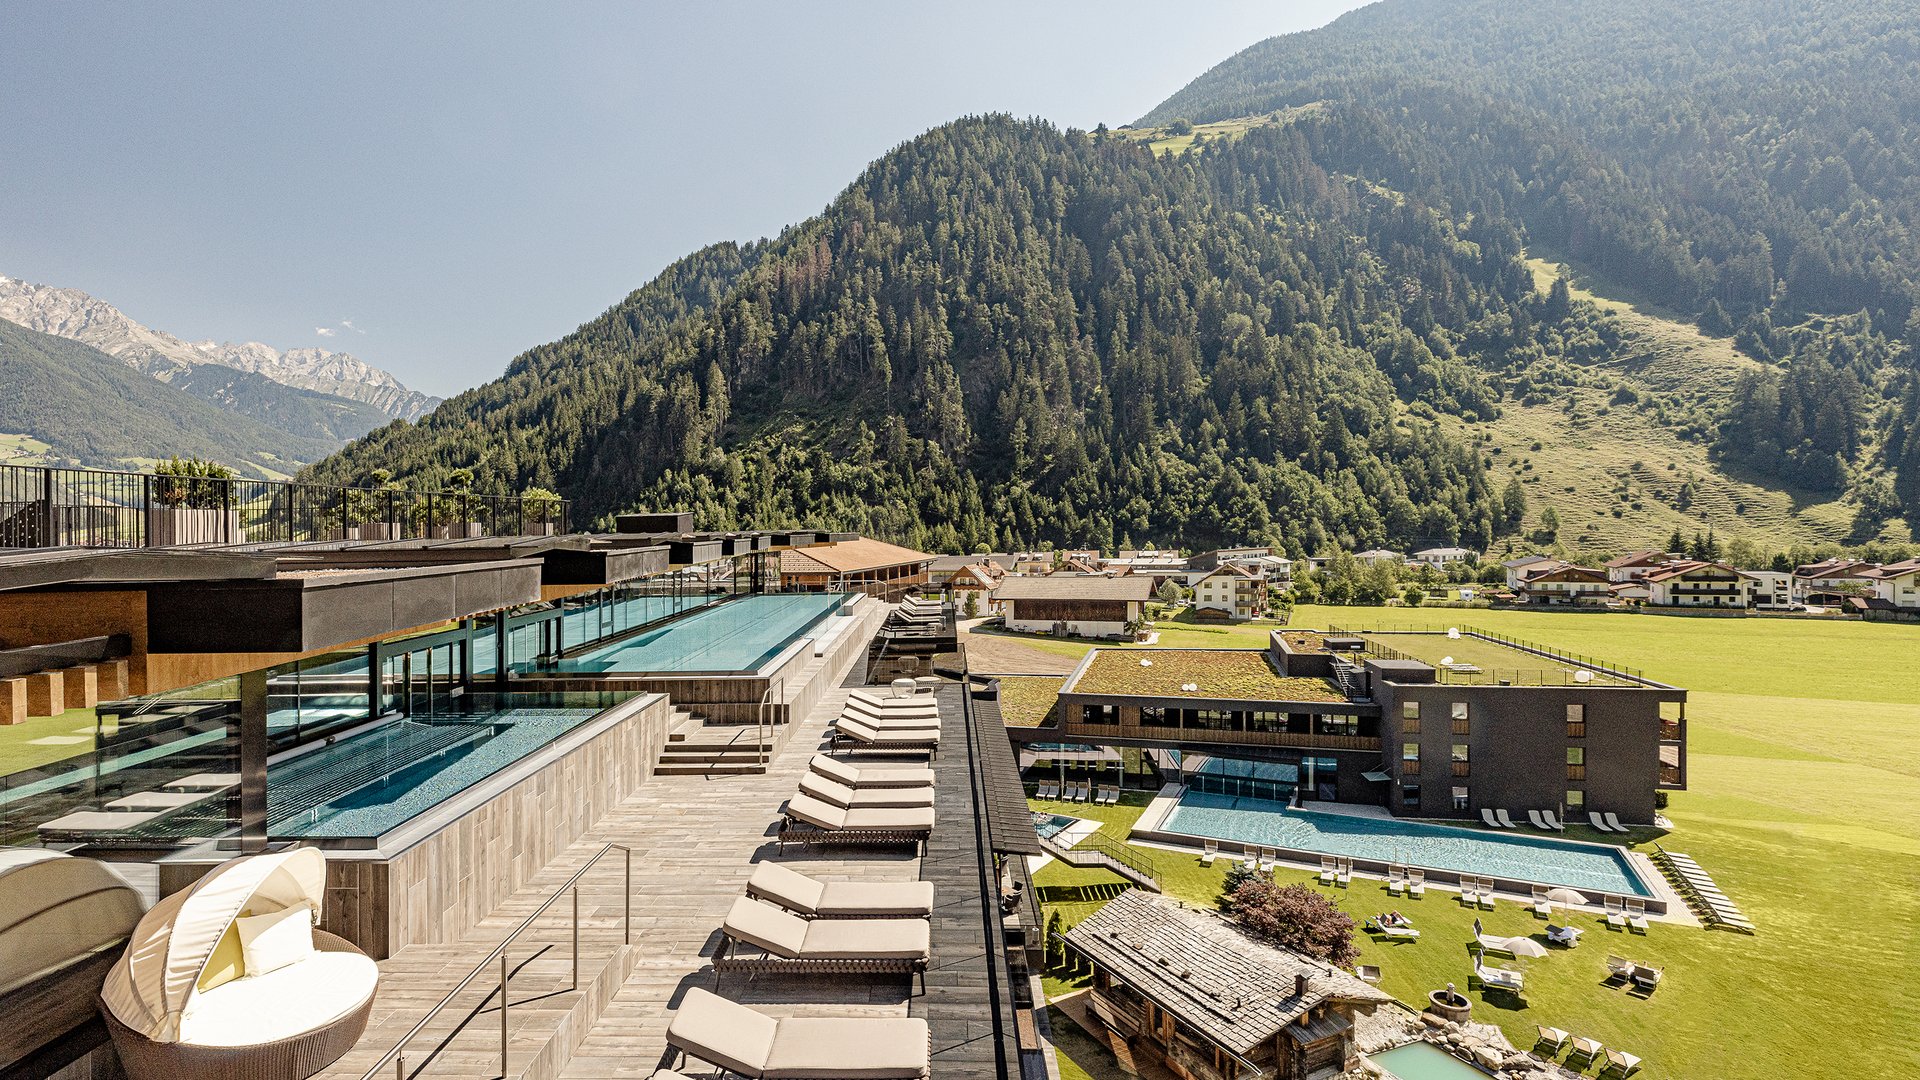 7,700 m² wellness and spa in Italy with 10 saunas